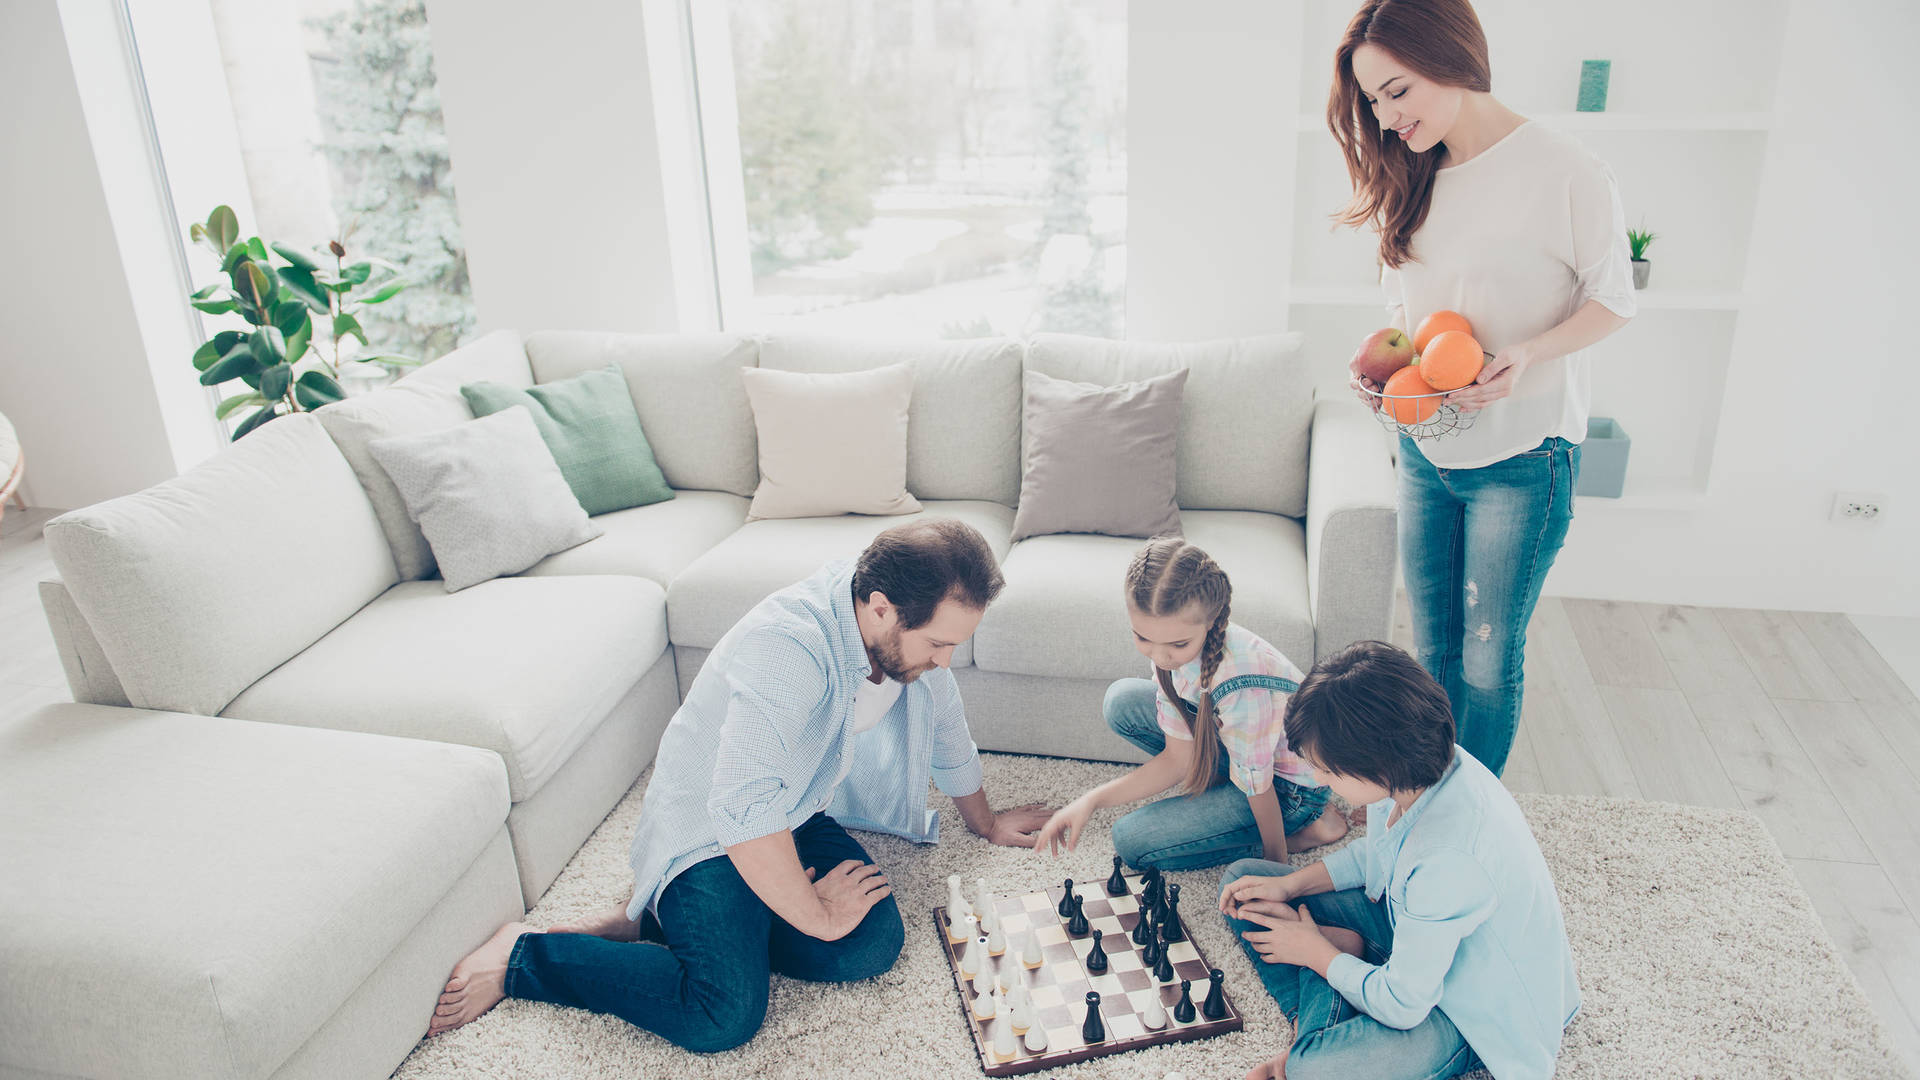 Boardgames played by a family